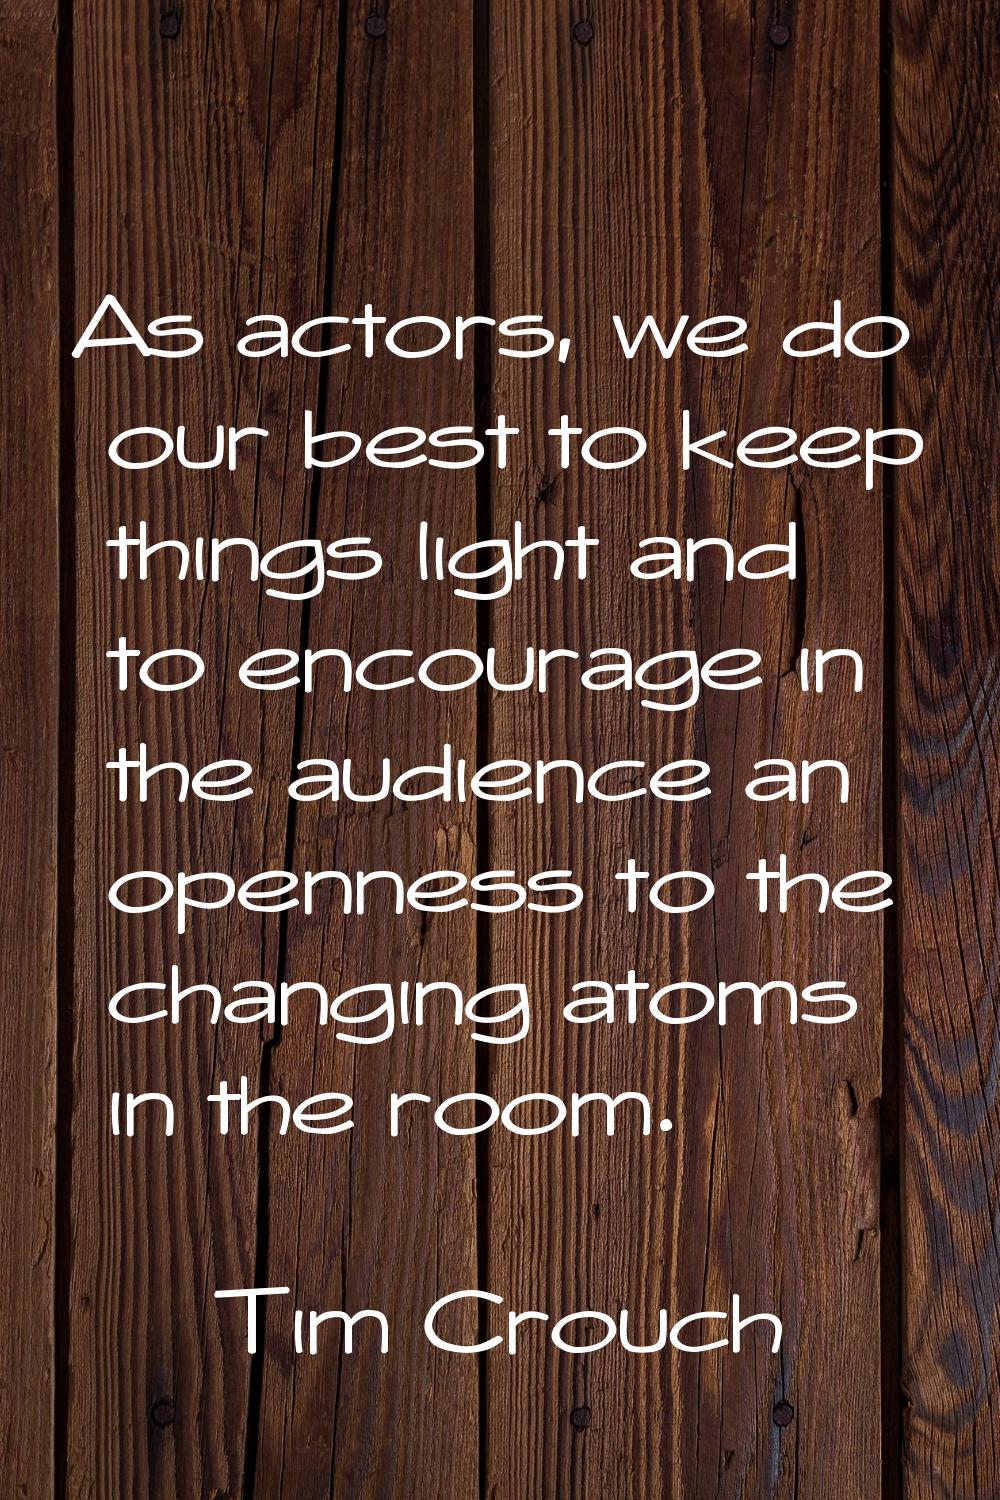 As actors, we do our best to keep things light and to encourage in the audience an openness to the 